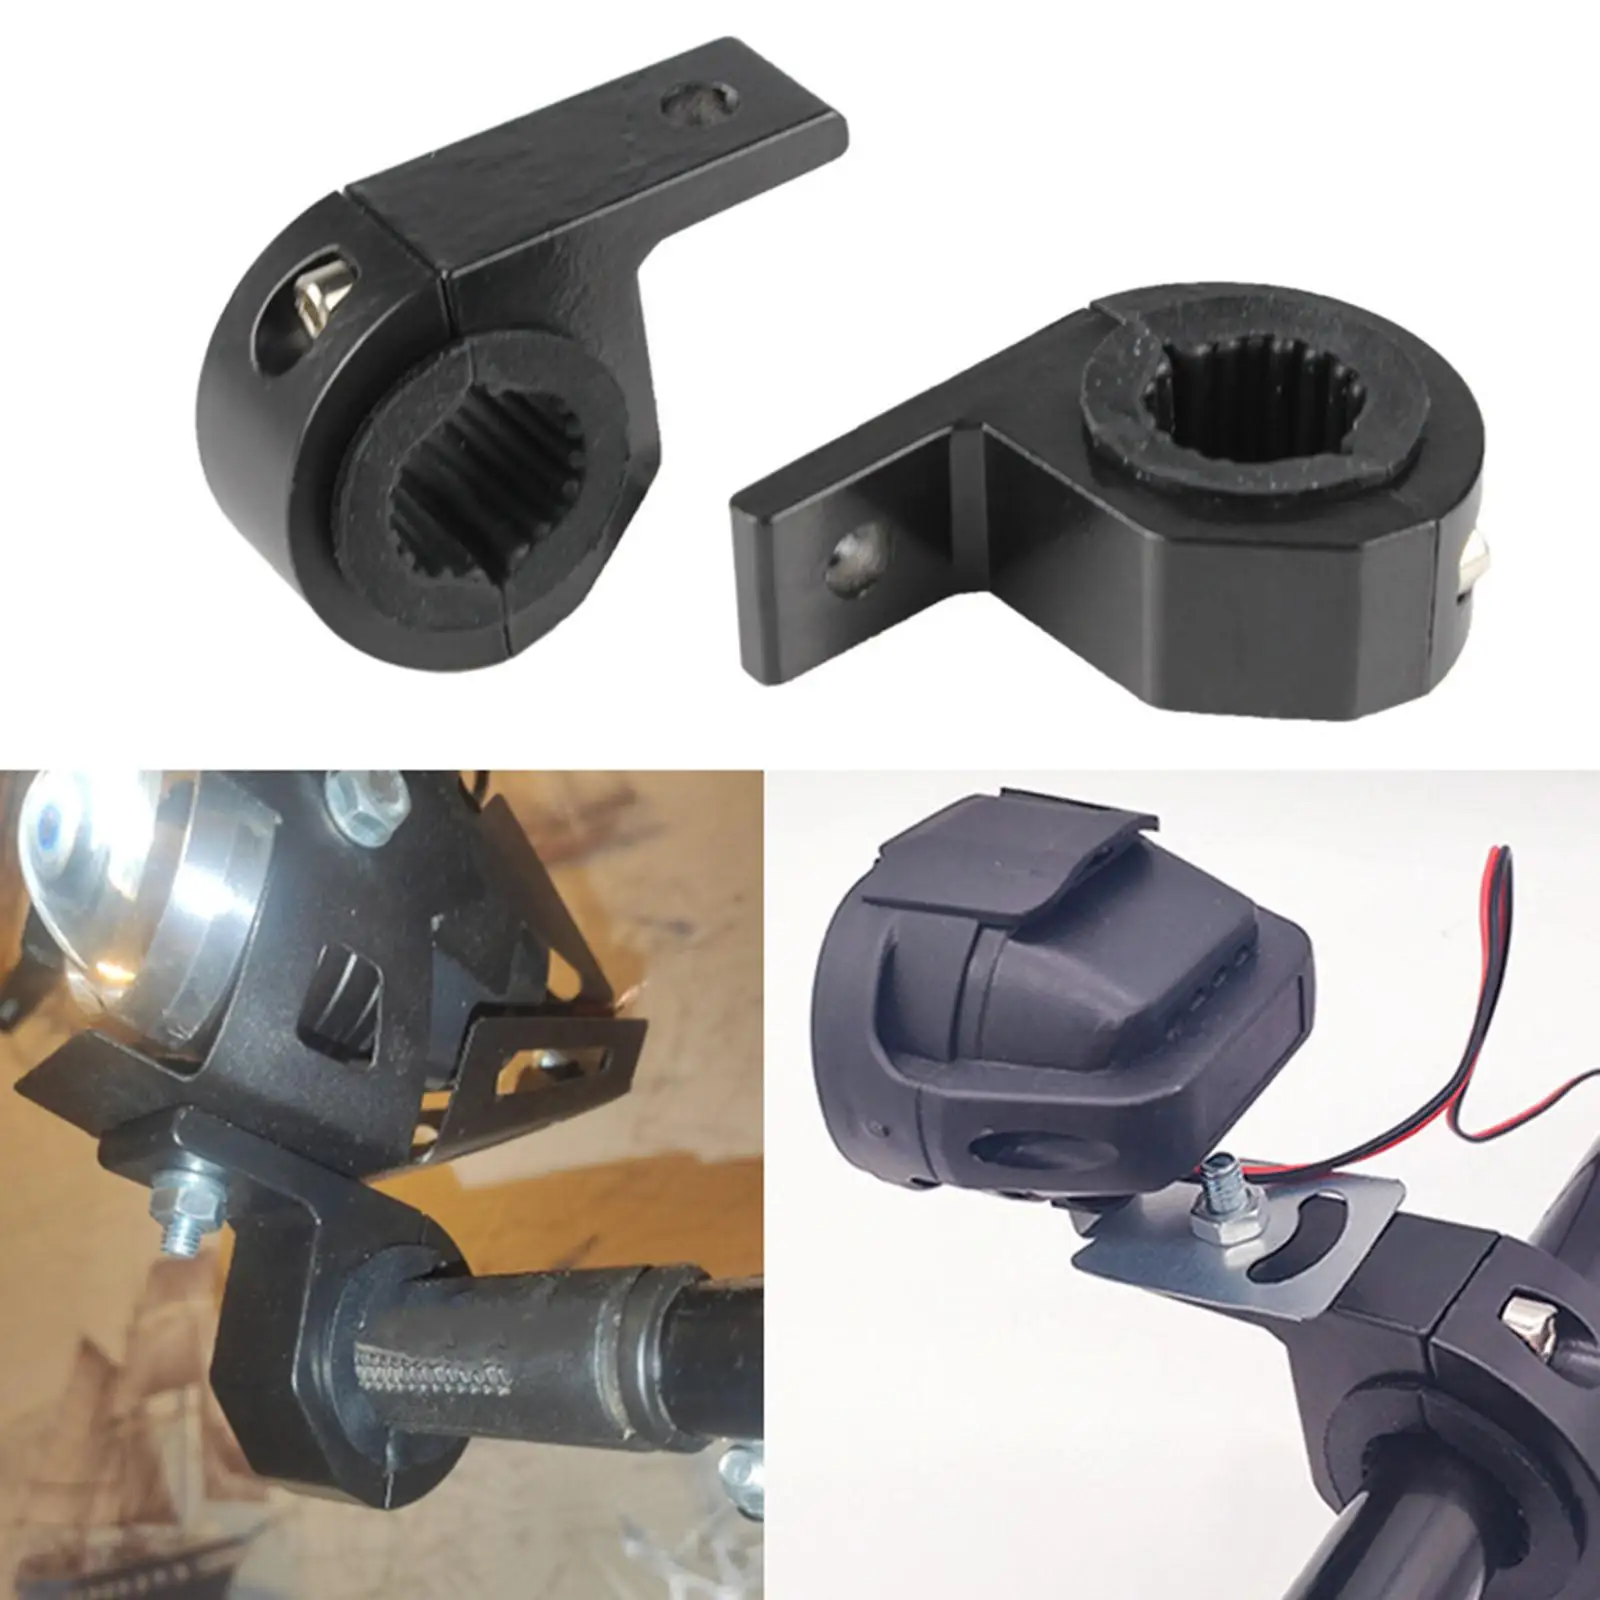 Motorcycle LED Headlight Clamps Brackets Tube Clamp Mount Kit for Motorcycle